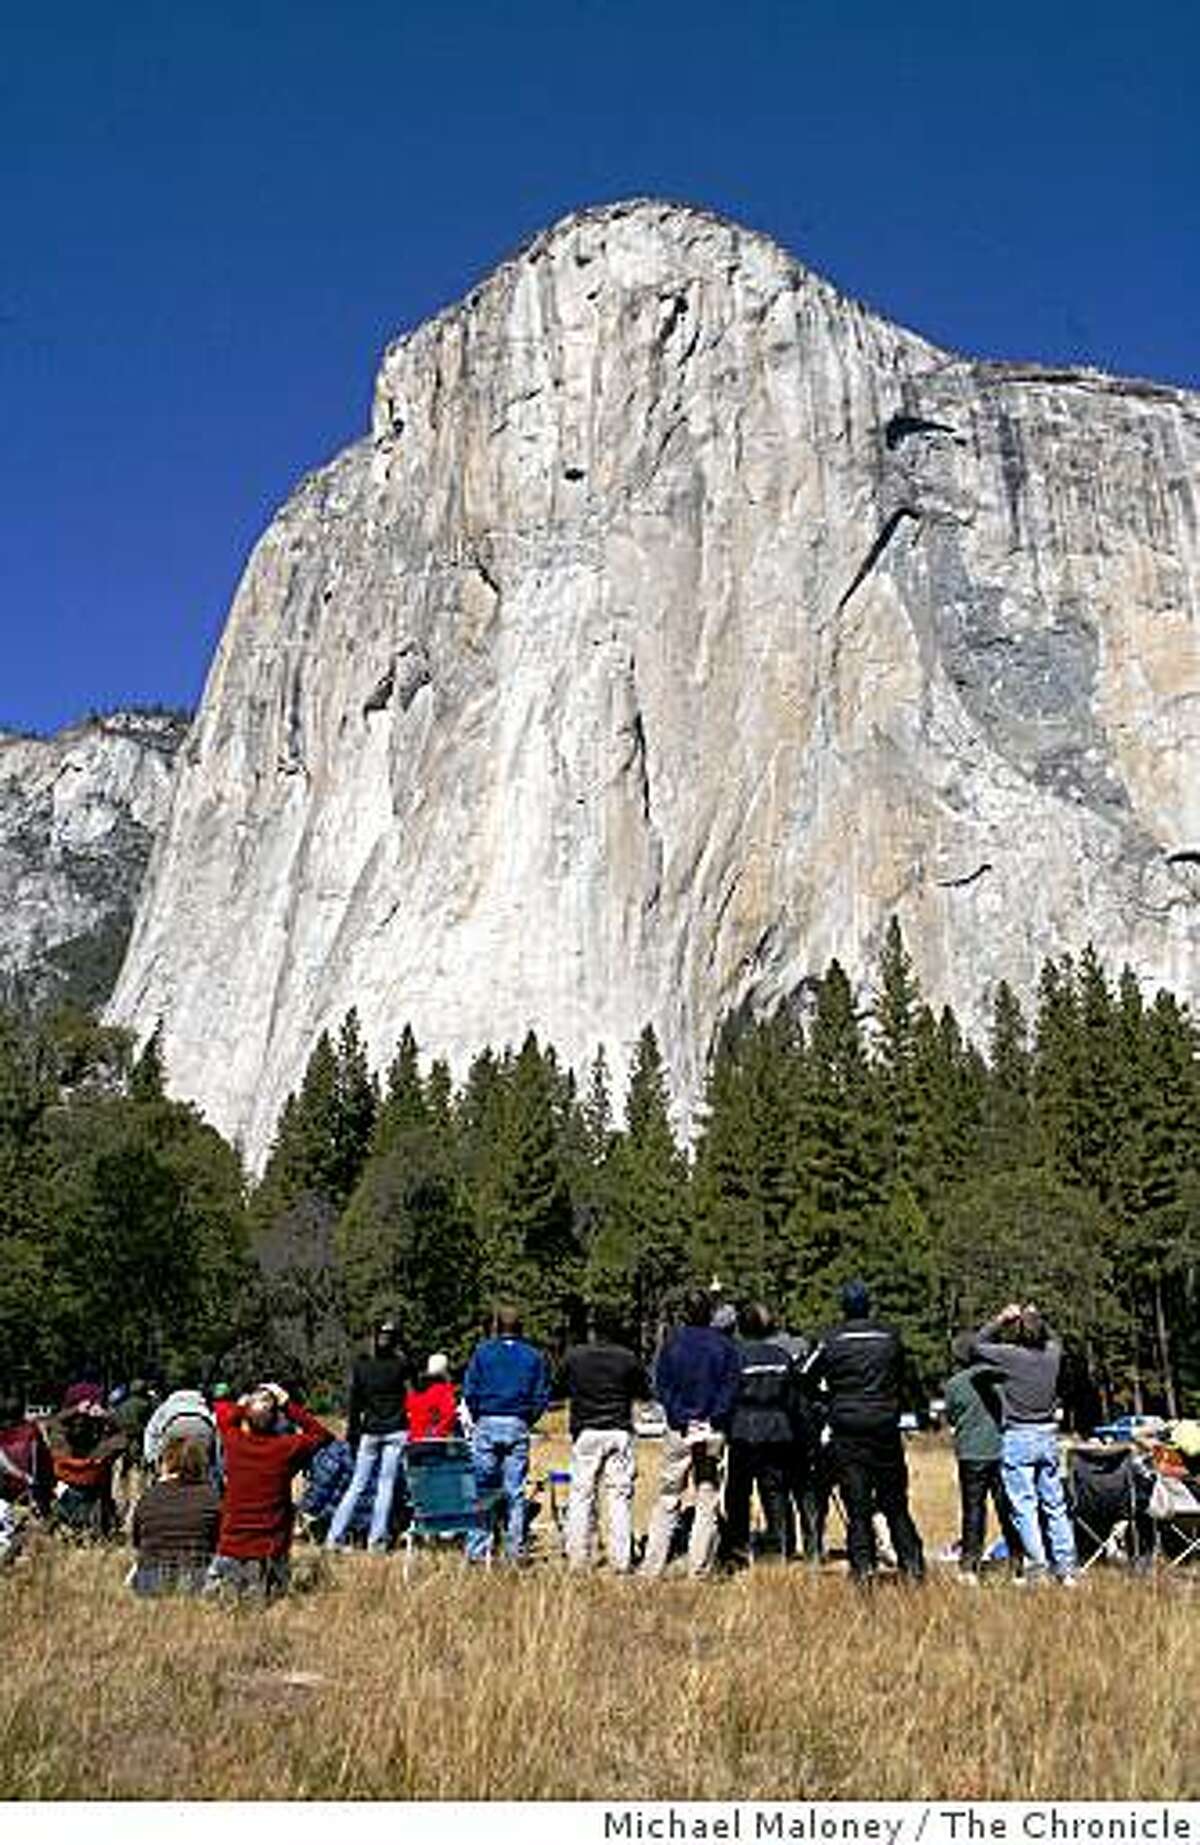 In this file photo, spectators watch climbers on El Capitan in Yosemite National Park.